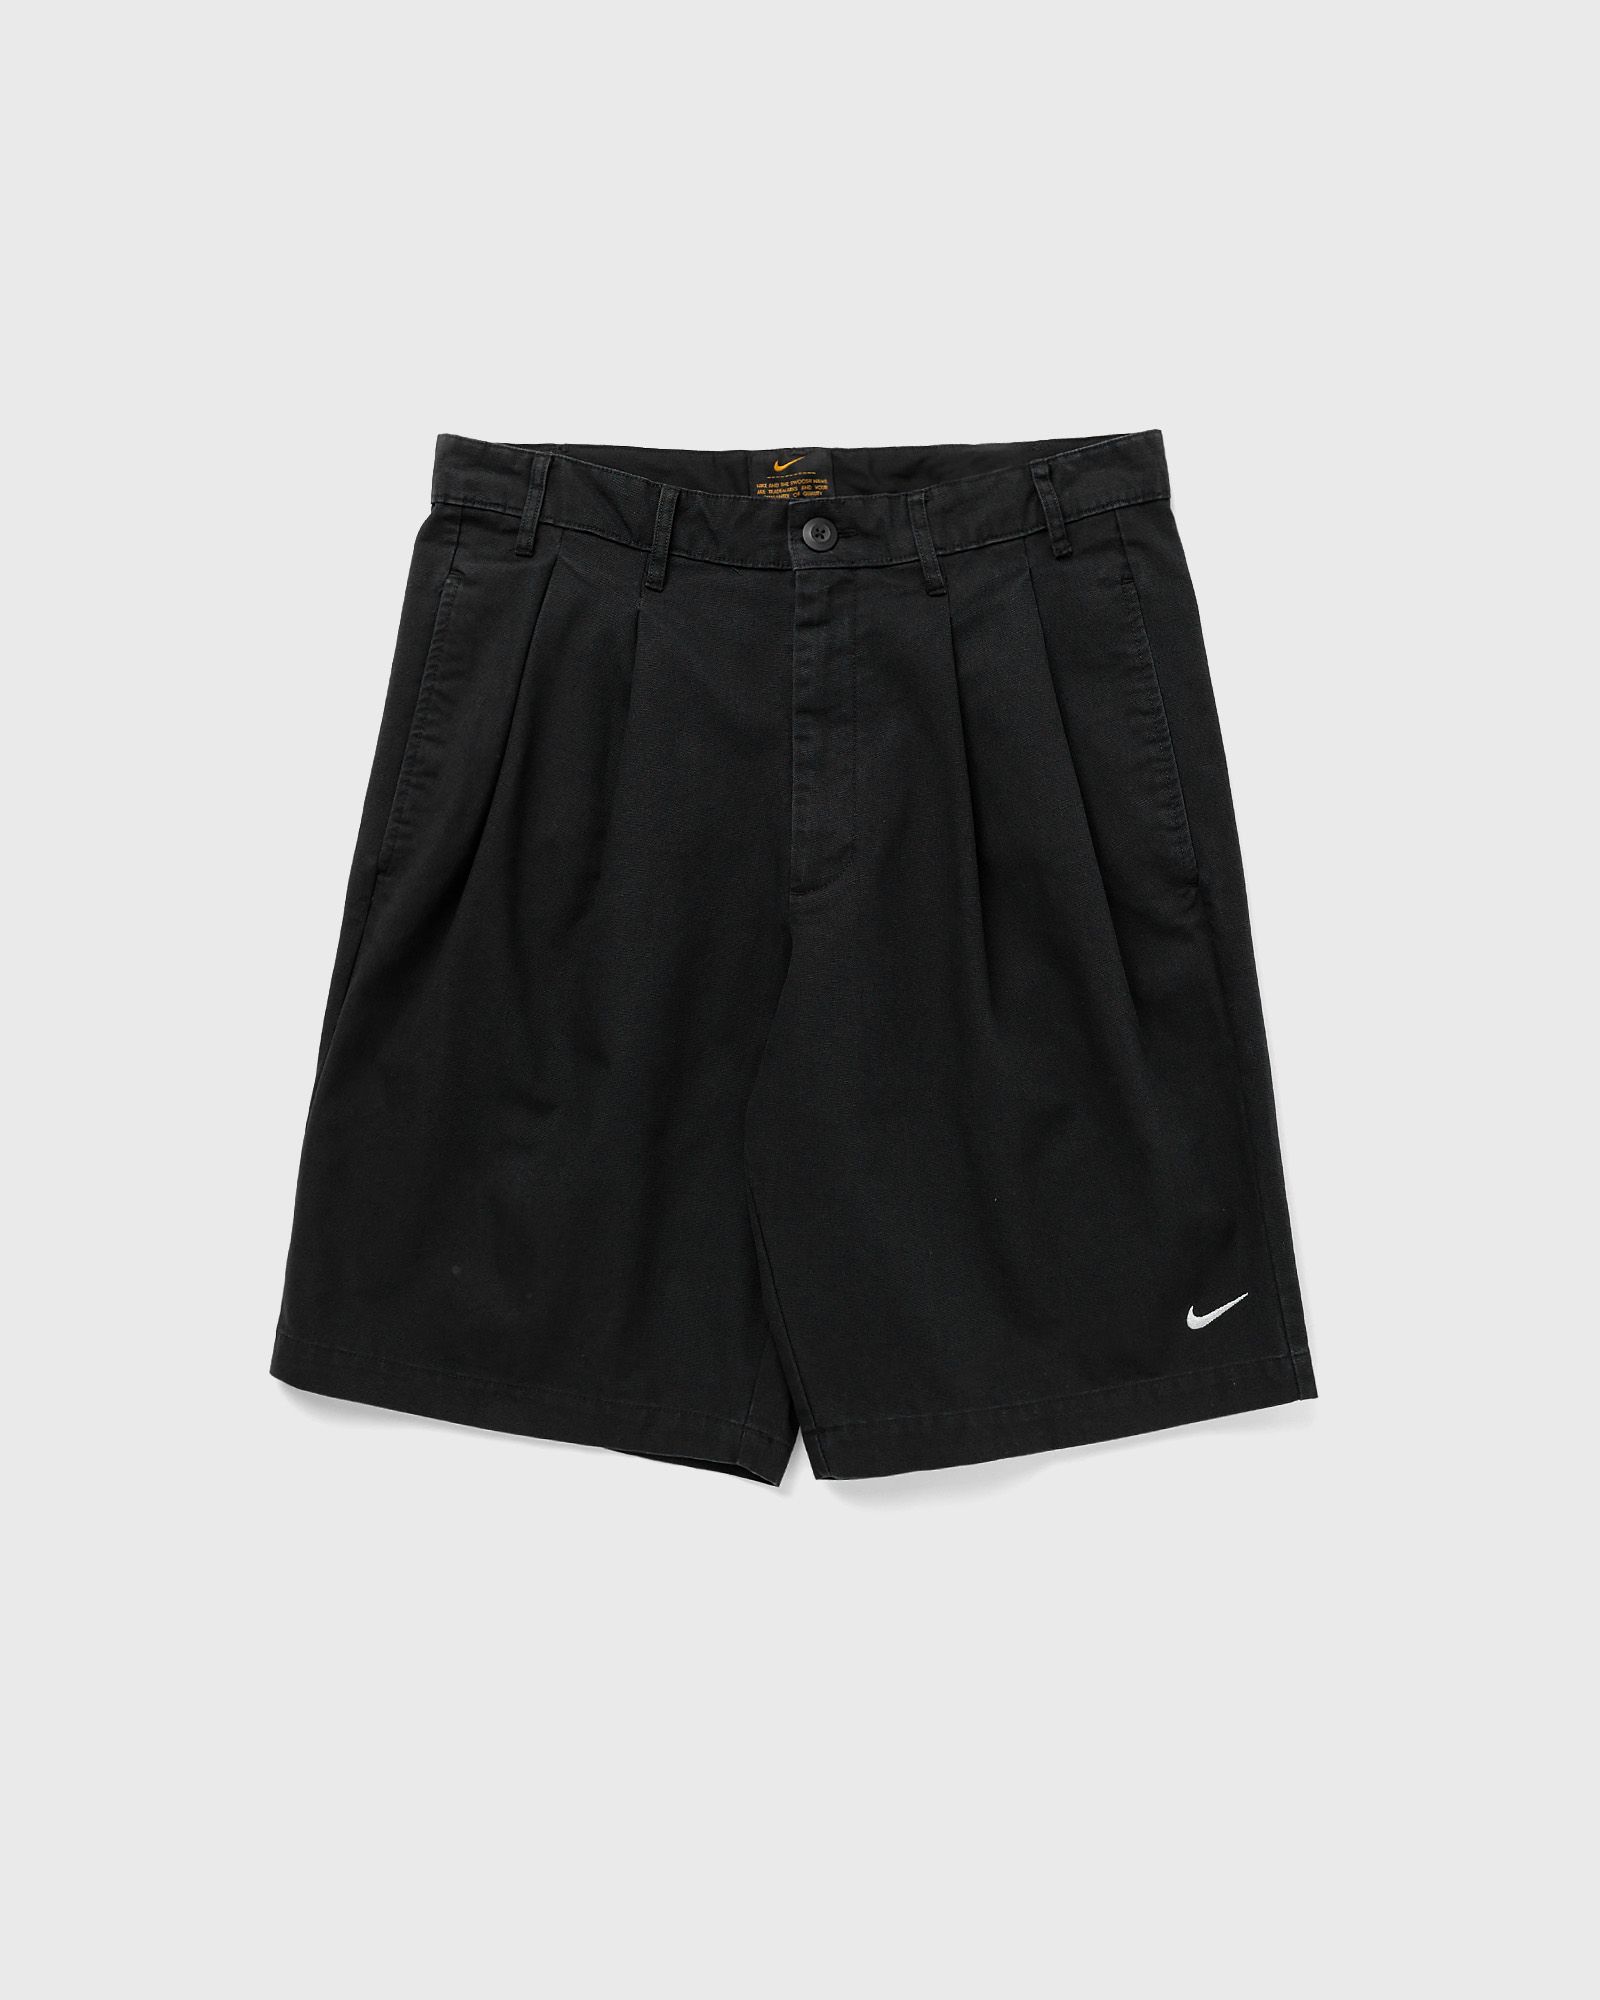 Nike - pleated chino shorts men casual shorts black in größe:m